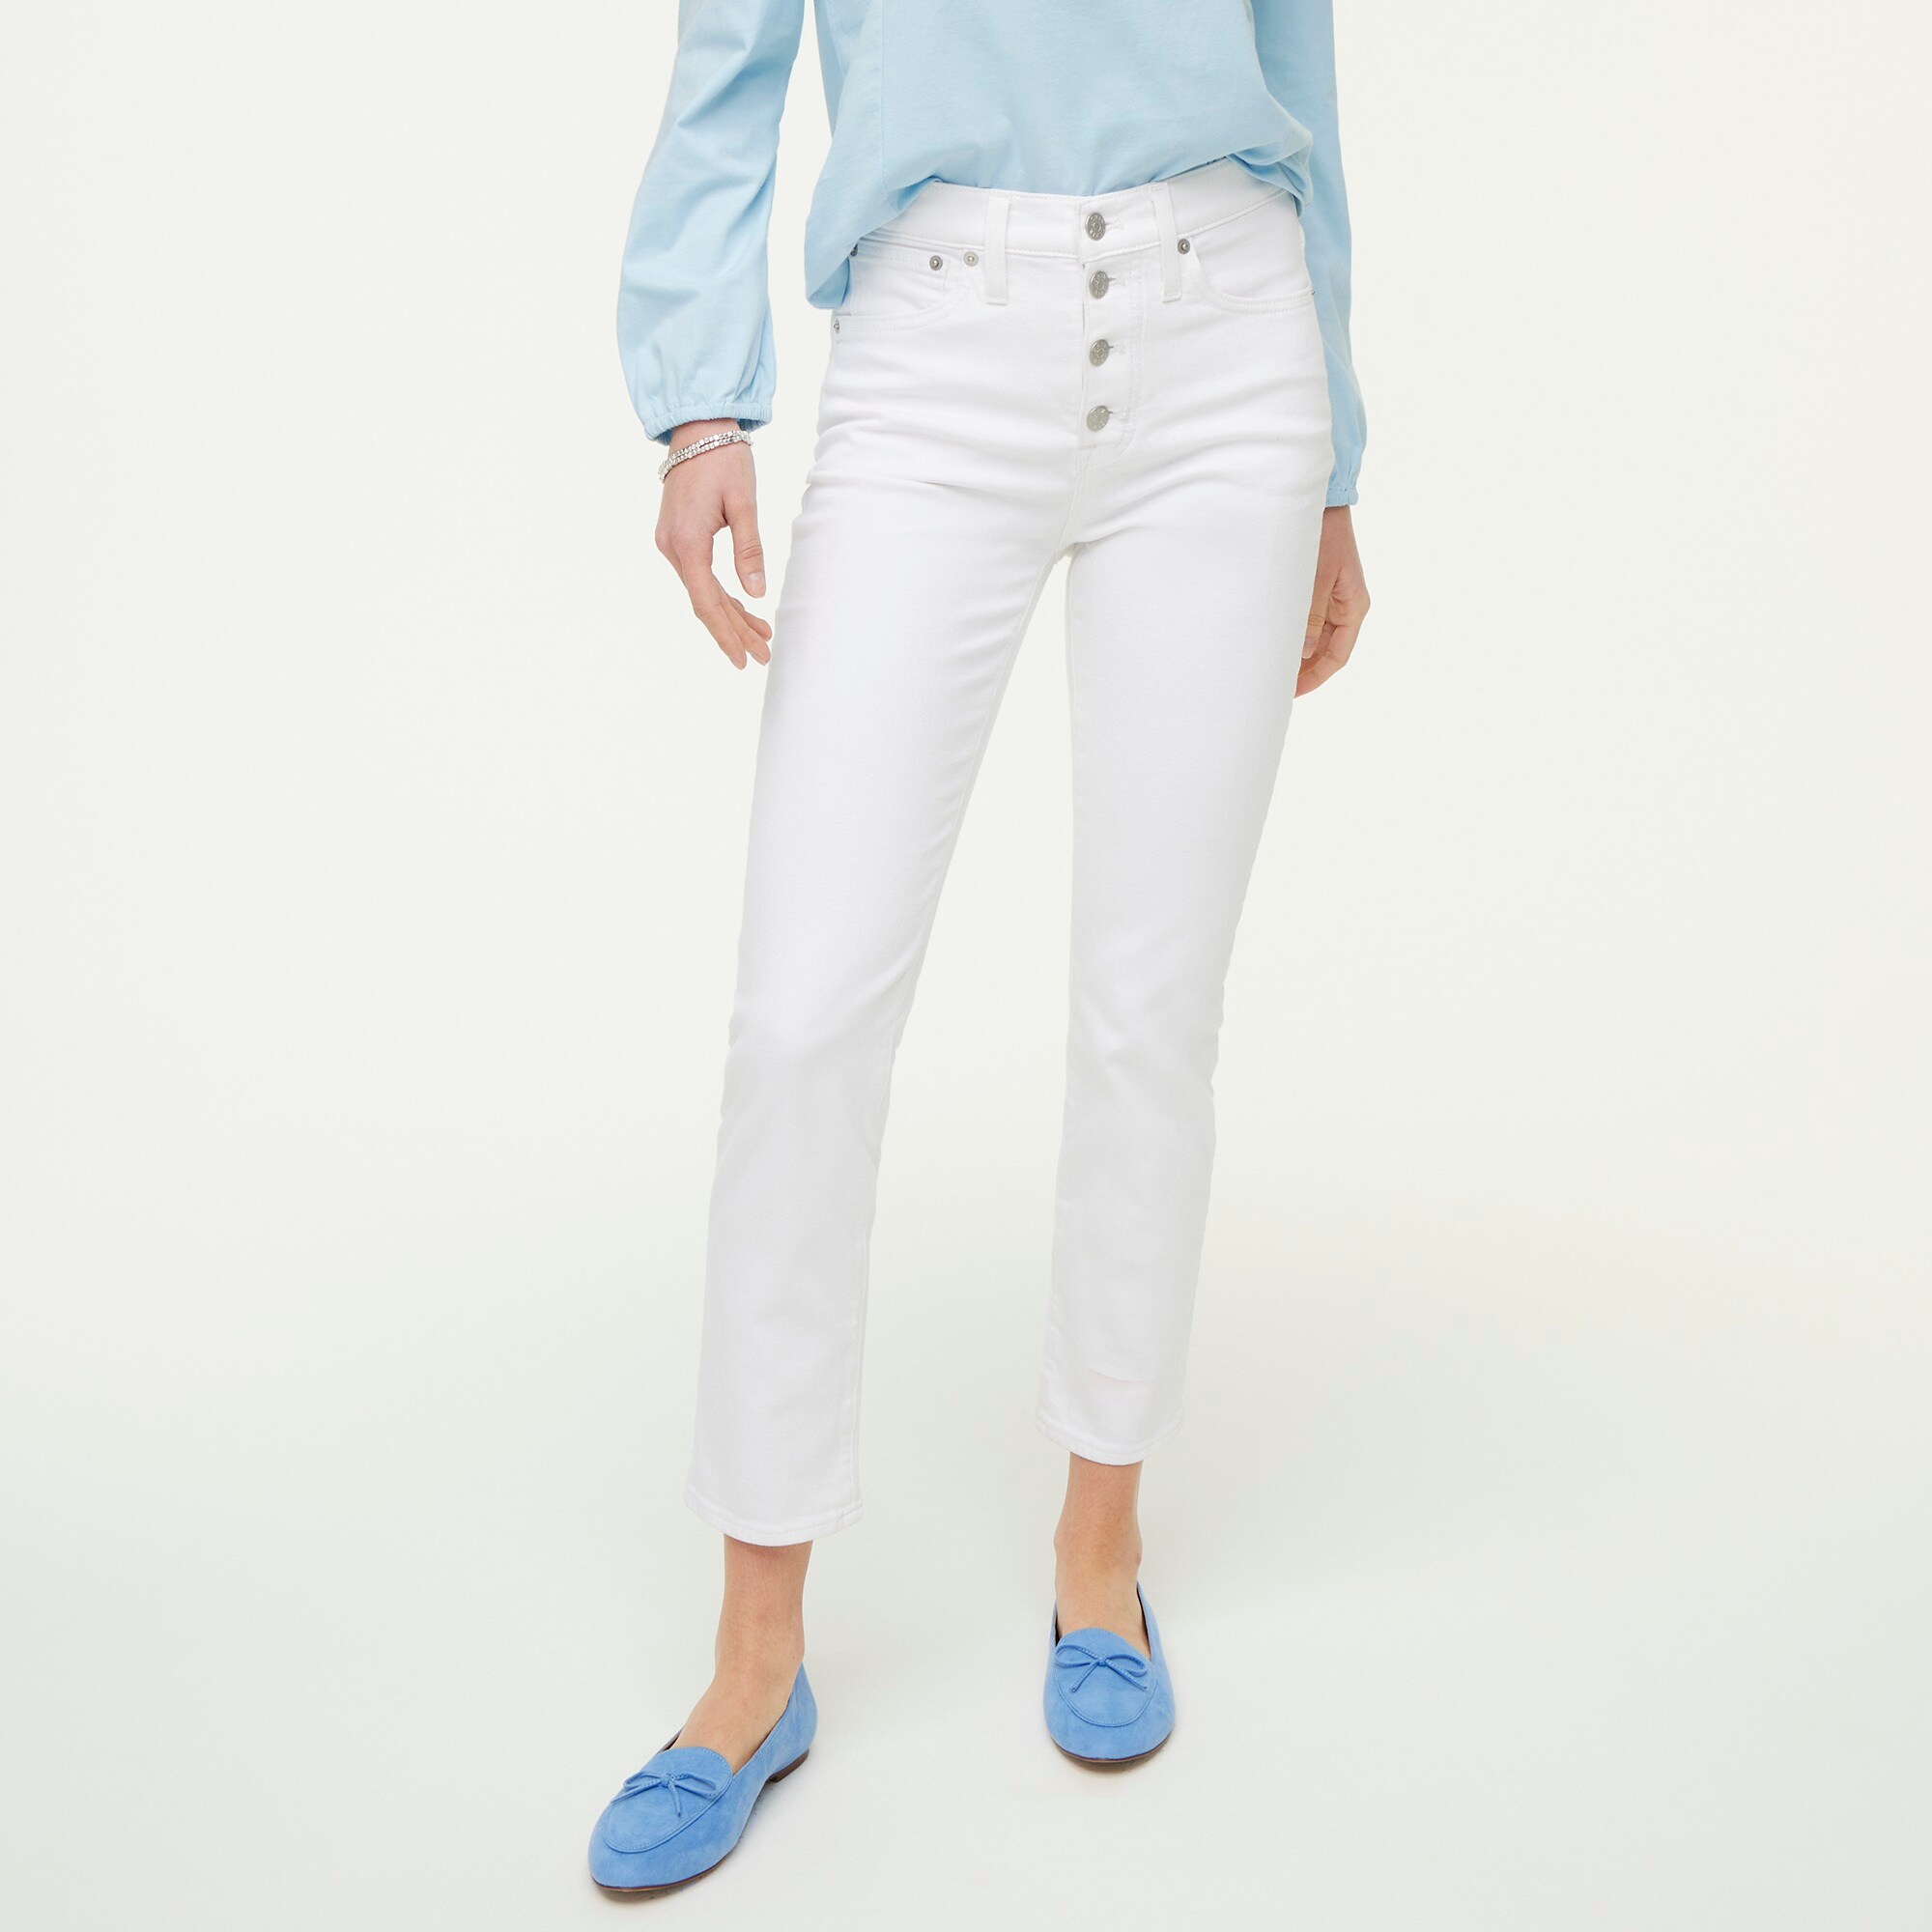 Jcrew Tall essential straight jean in all-day stretch